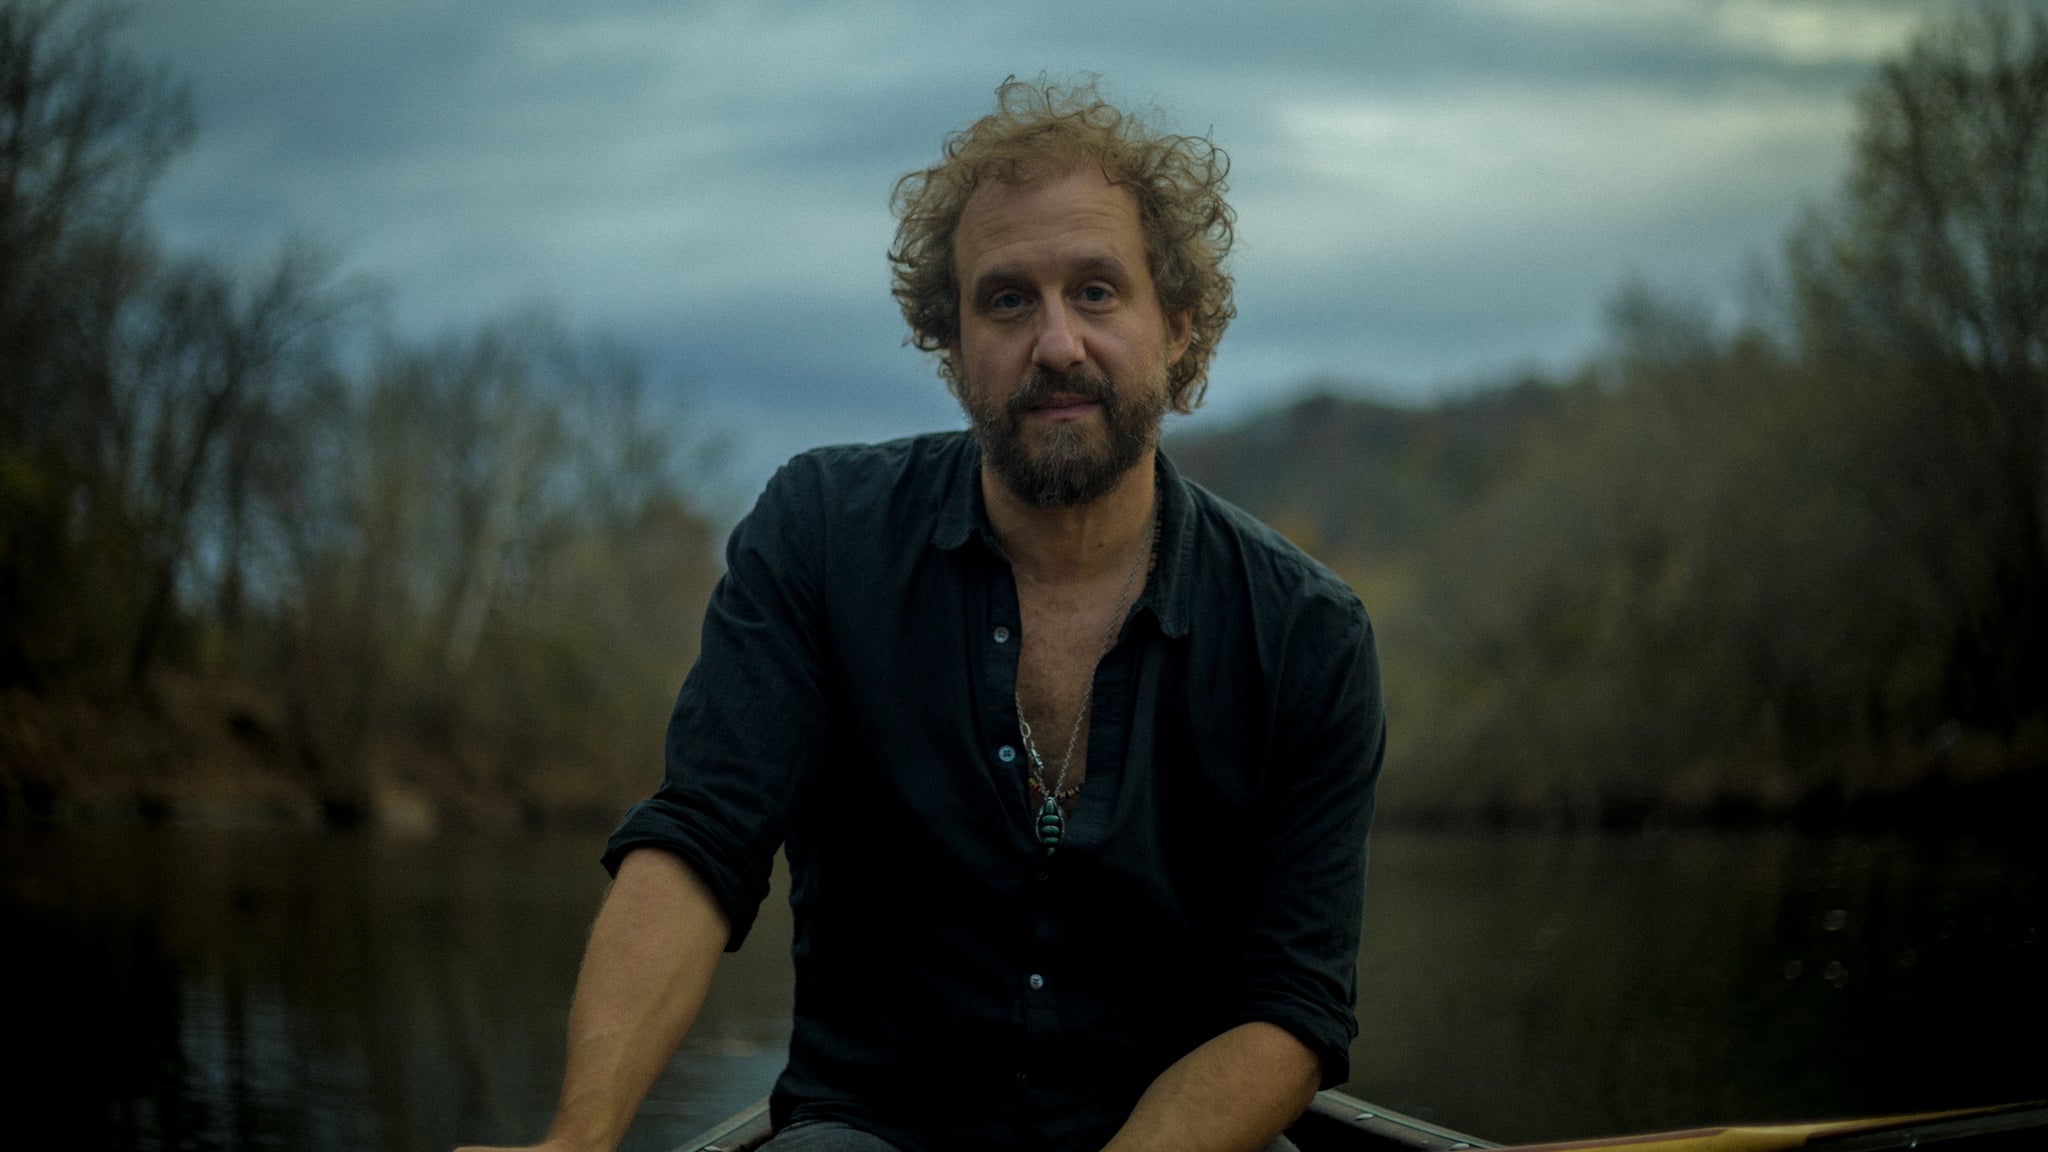 An evening with Phosphorescent